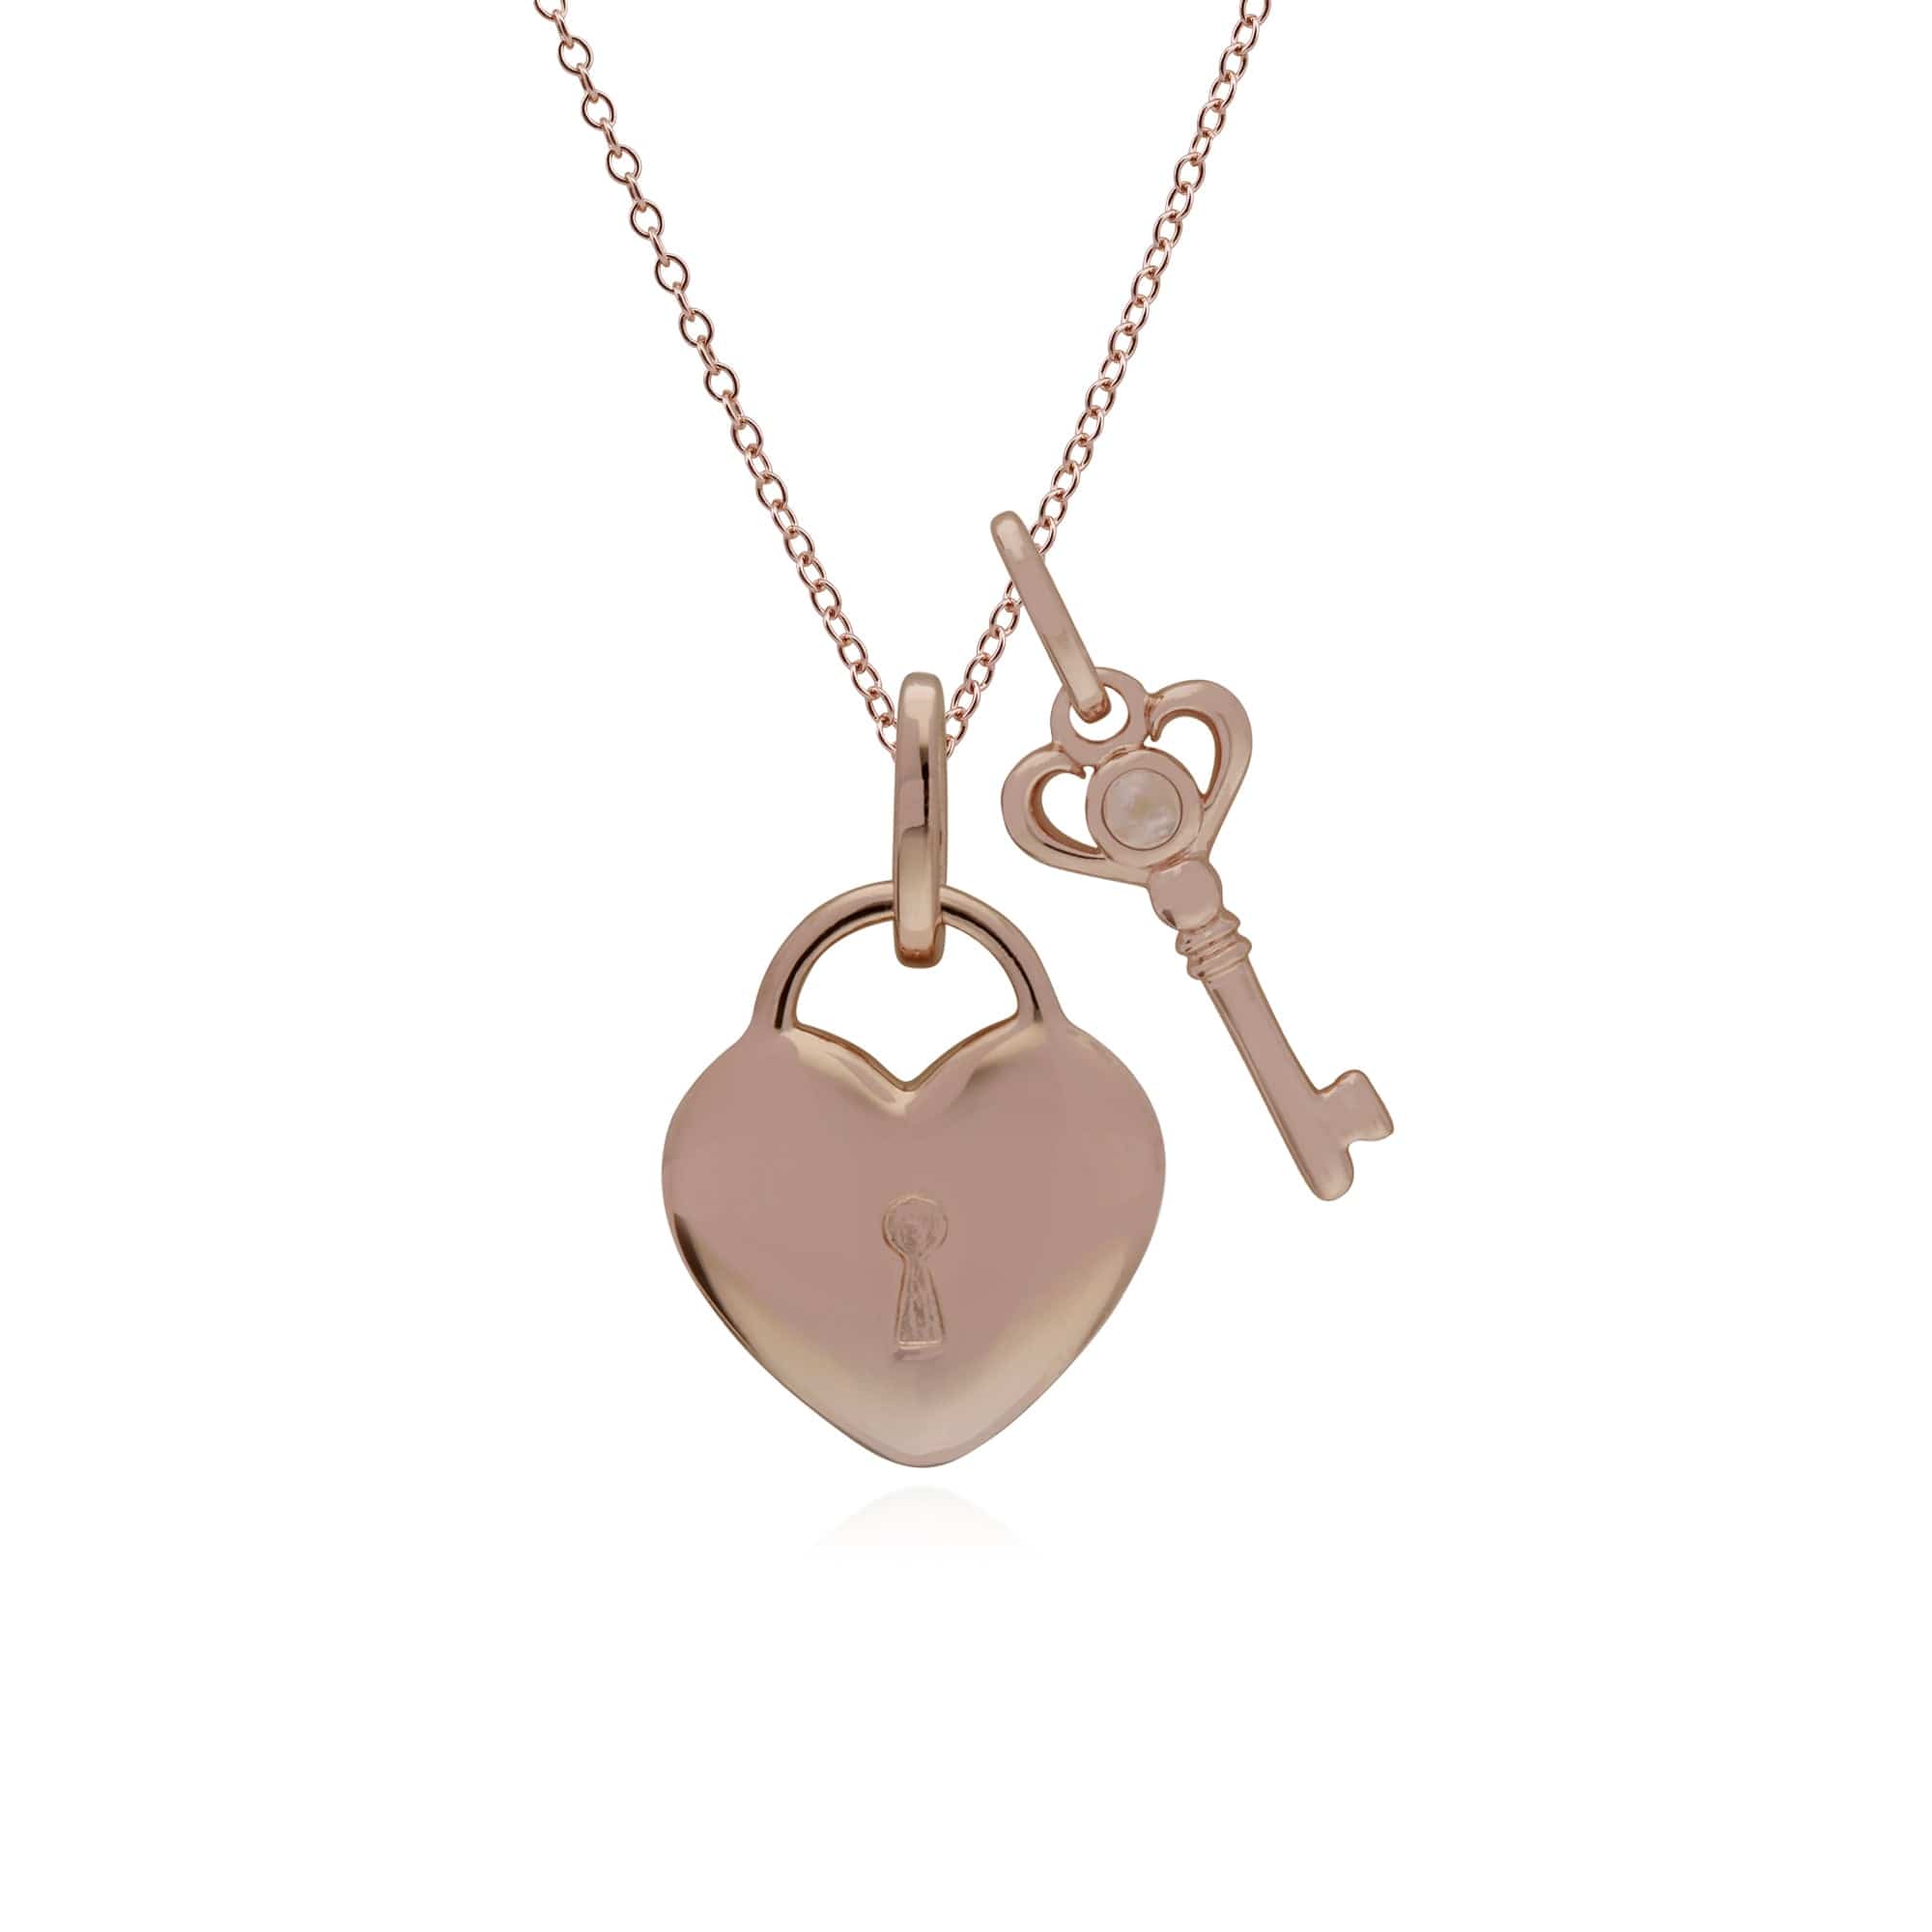 270P028601925-270P026901925 Classic Heart Lock Pendant & Rainbow Moonstone Key Charm in Rose Gold Plated 925 Sterling Silver 1